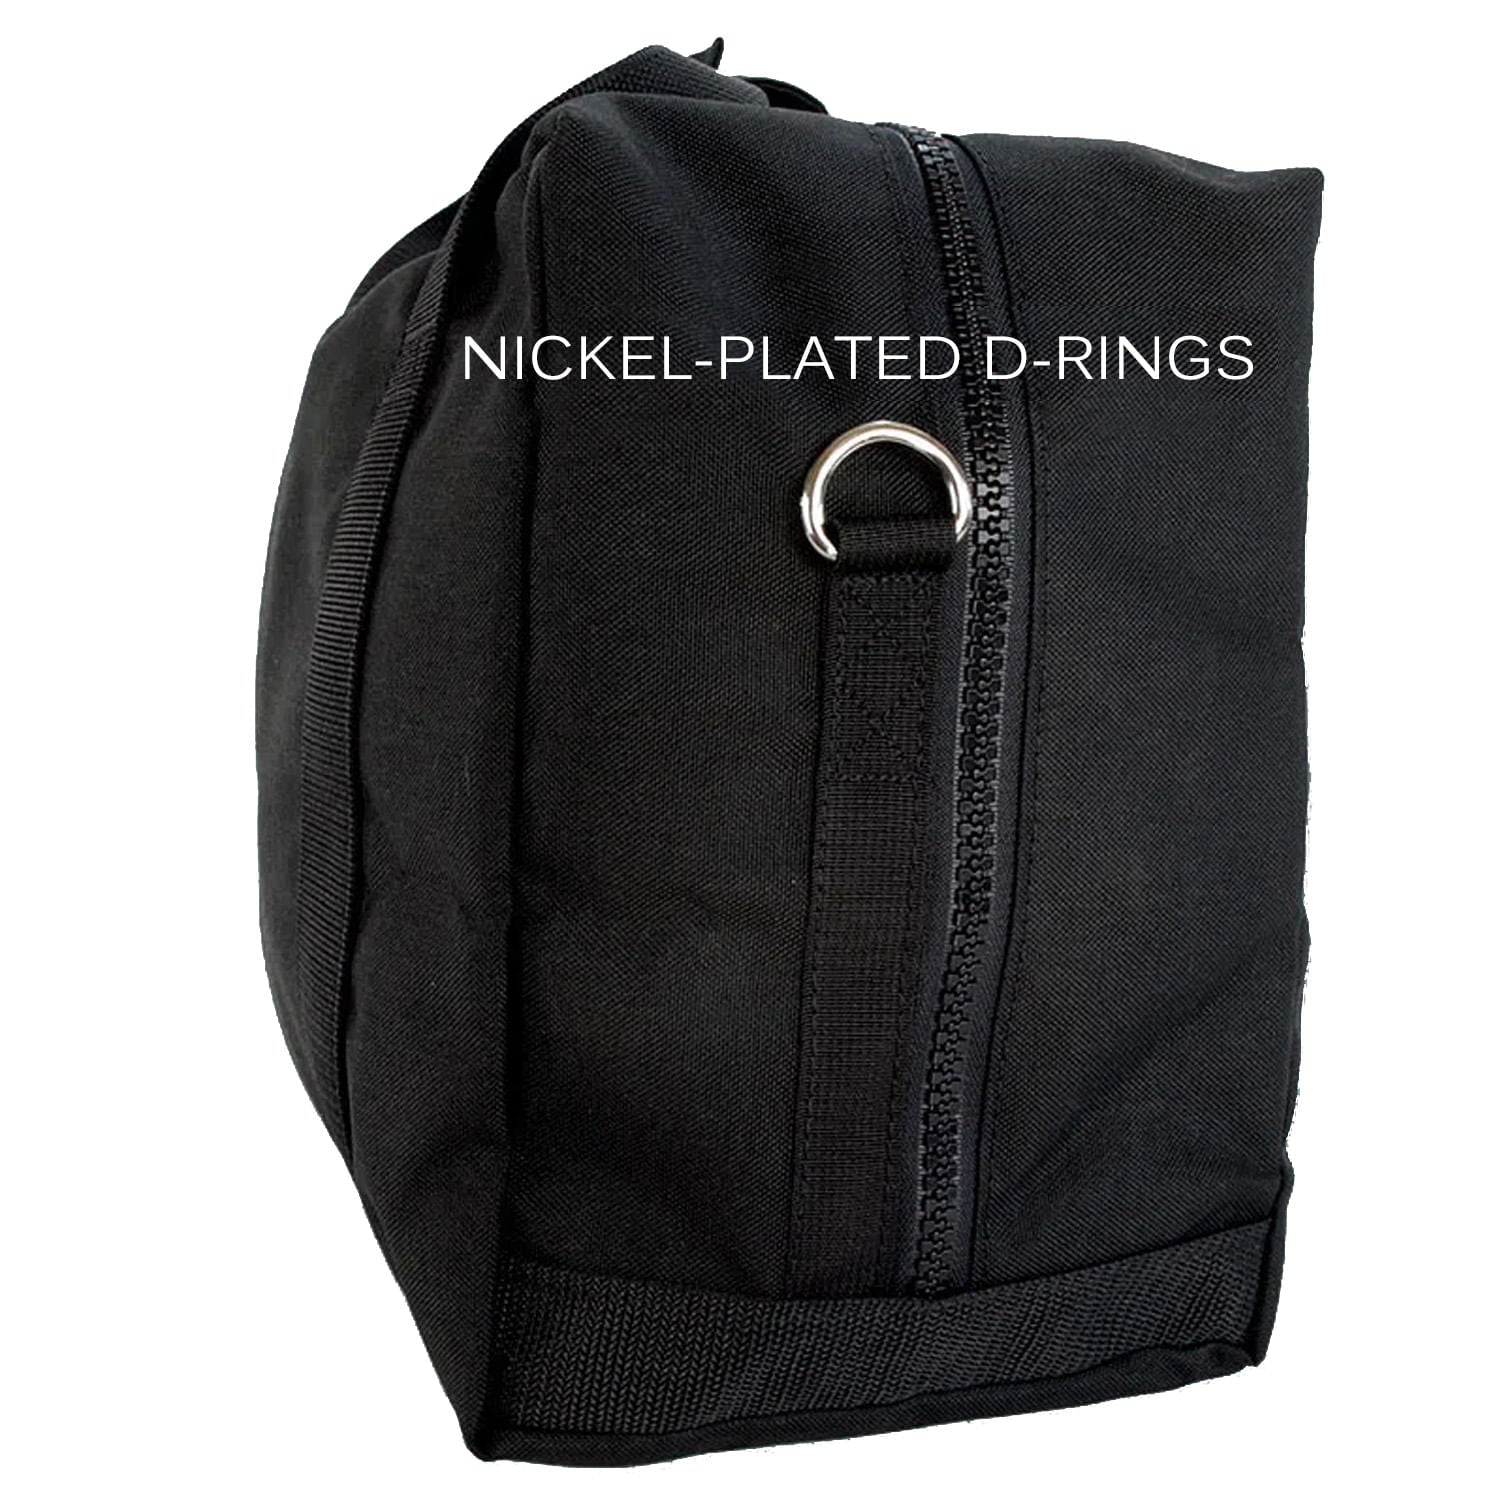 Aviator kit bag with Nickel plated D rings 